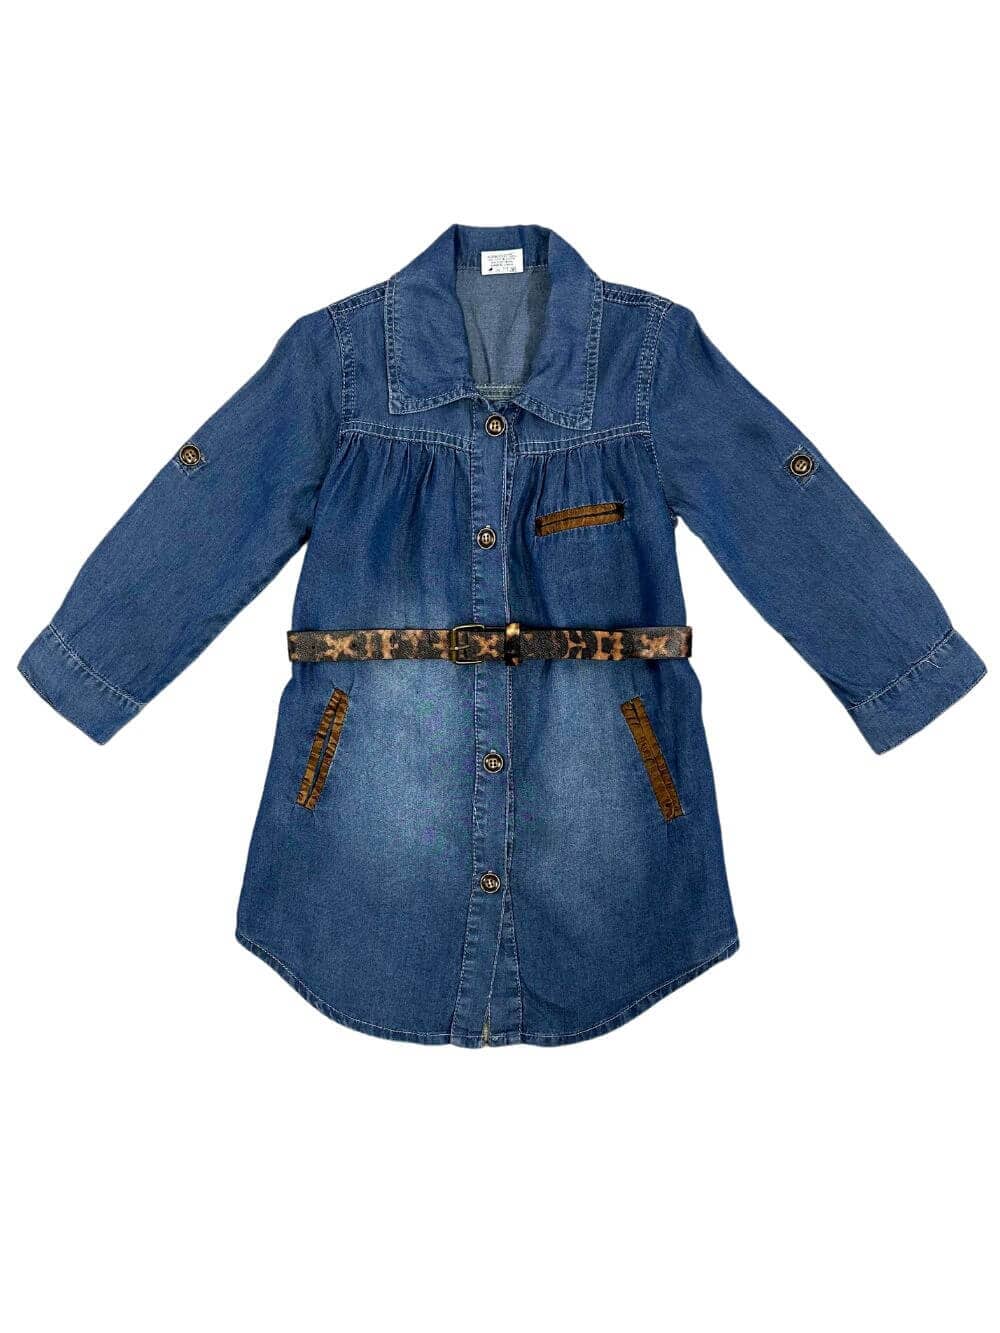 Kids Solid Regular Fit Shirts | Casual Cotton Denim Shirt for Kids | Solid  Design Cotton Denim Half Sleeves Button Down Shirt for Kids - Age - 3-6  Months : Amazon.in: Clothing & Accessories